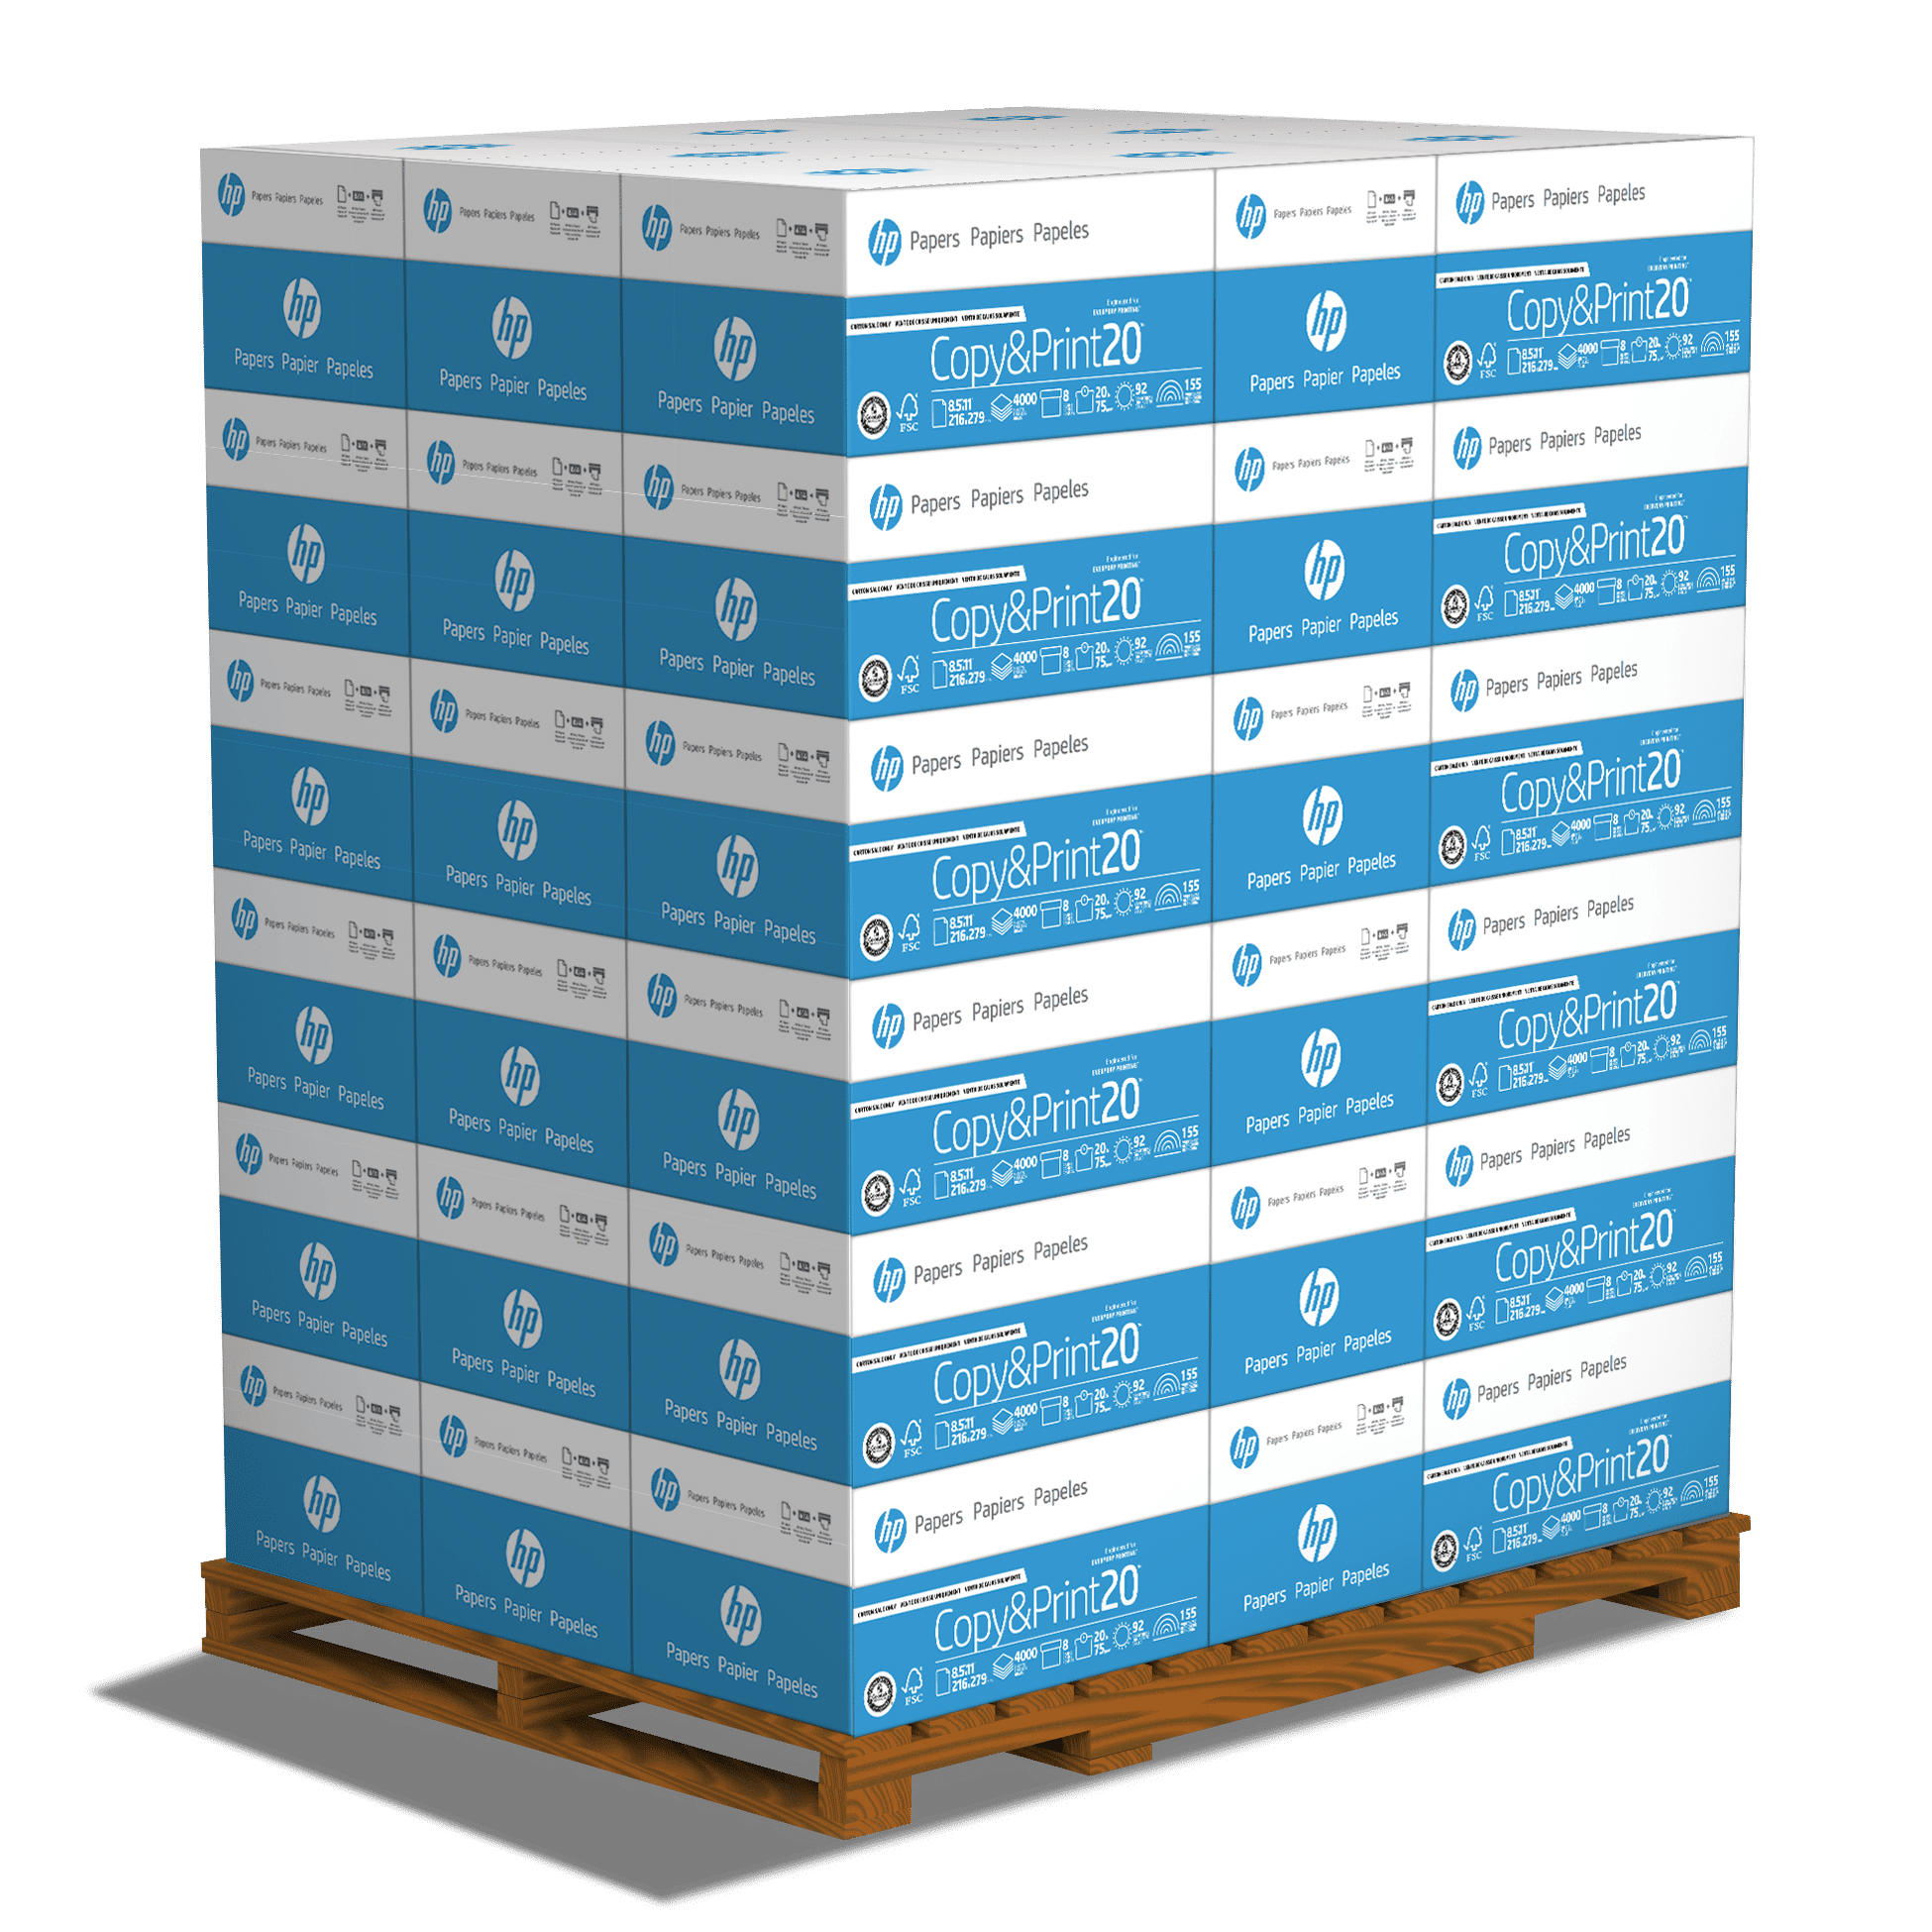 HP Printer Paper - Copy and Print, 20 lb., 8.5 x 11, 1 Pallet, 40 Cases  (160,000 Sheets), White